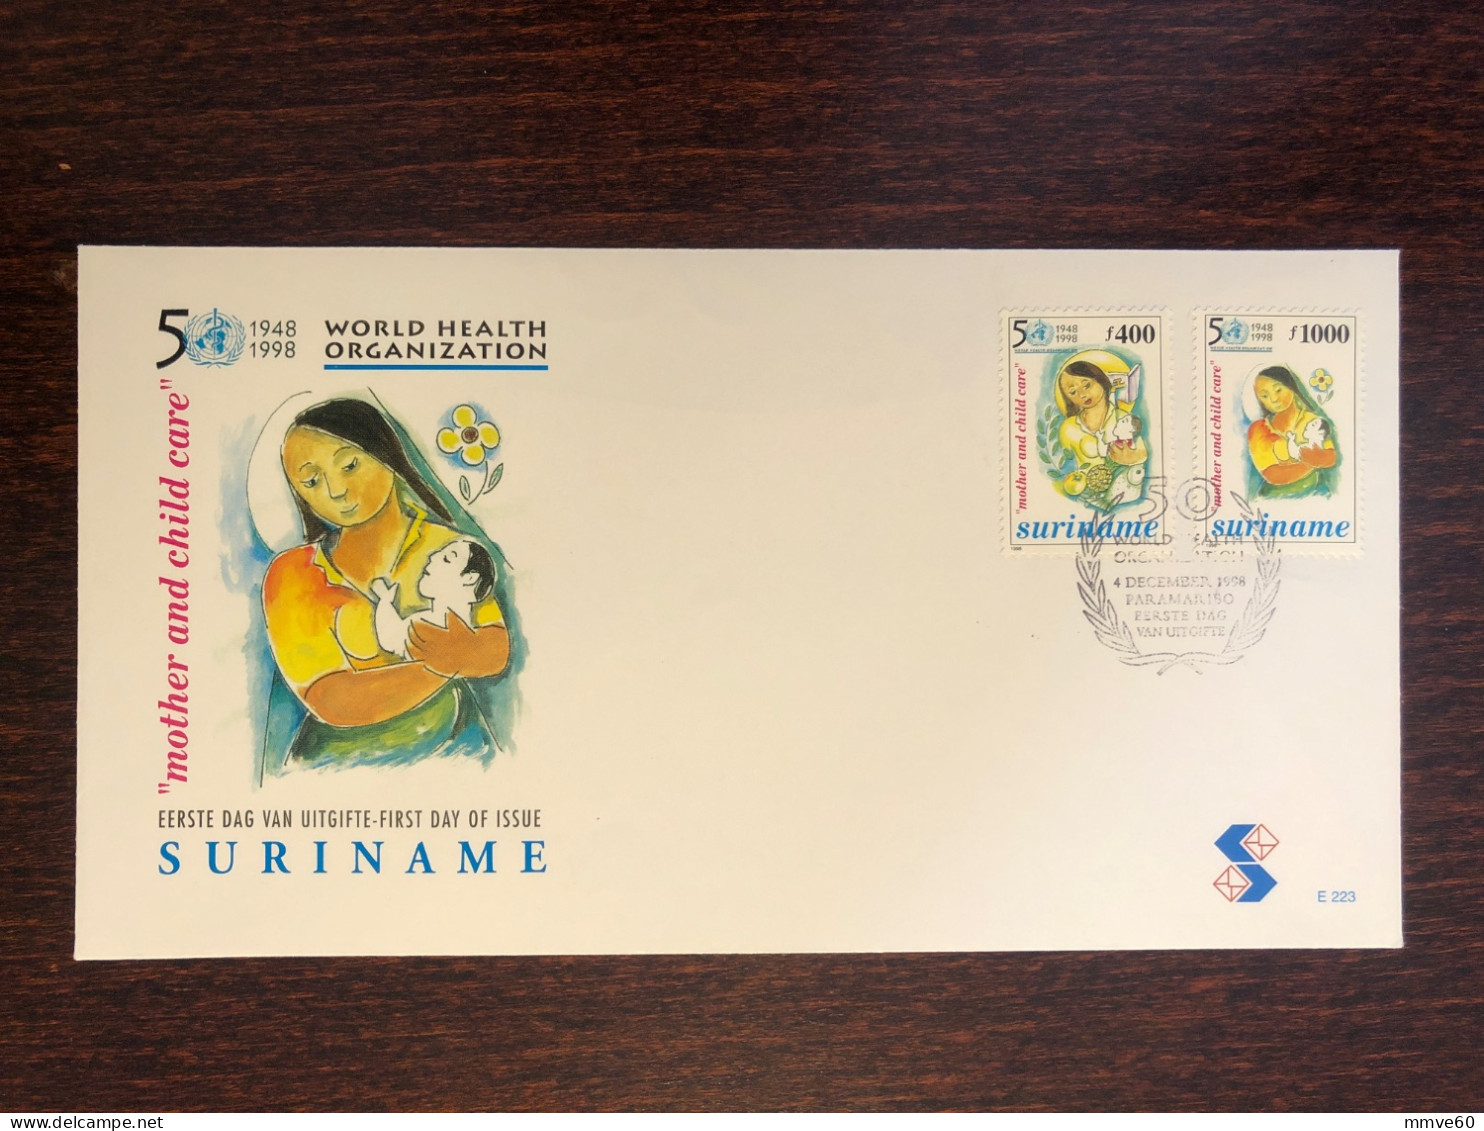 SURINAM FDC COVER 1998 YEAR WHO OMS  HEALTH MEDICINE STAMPS - Suriname